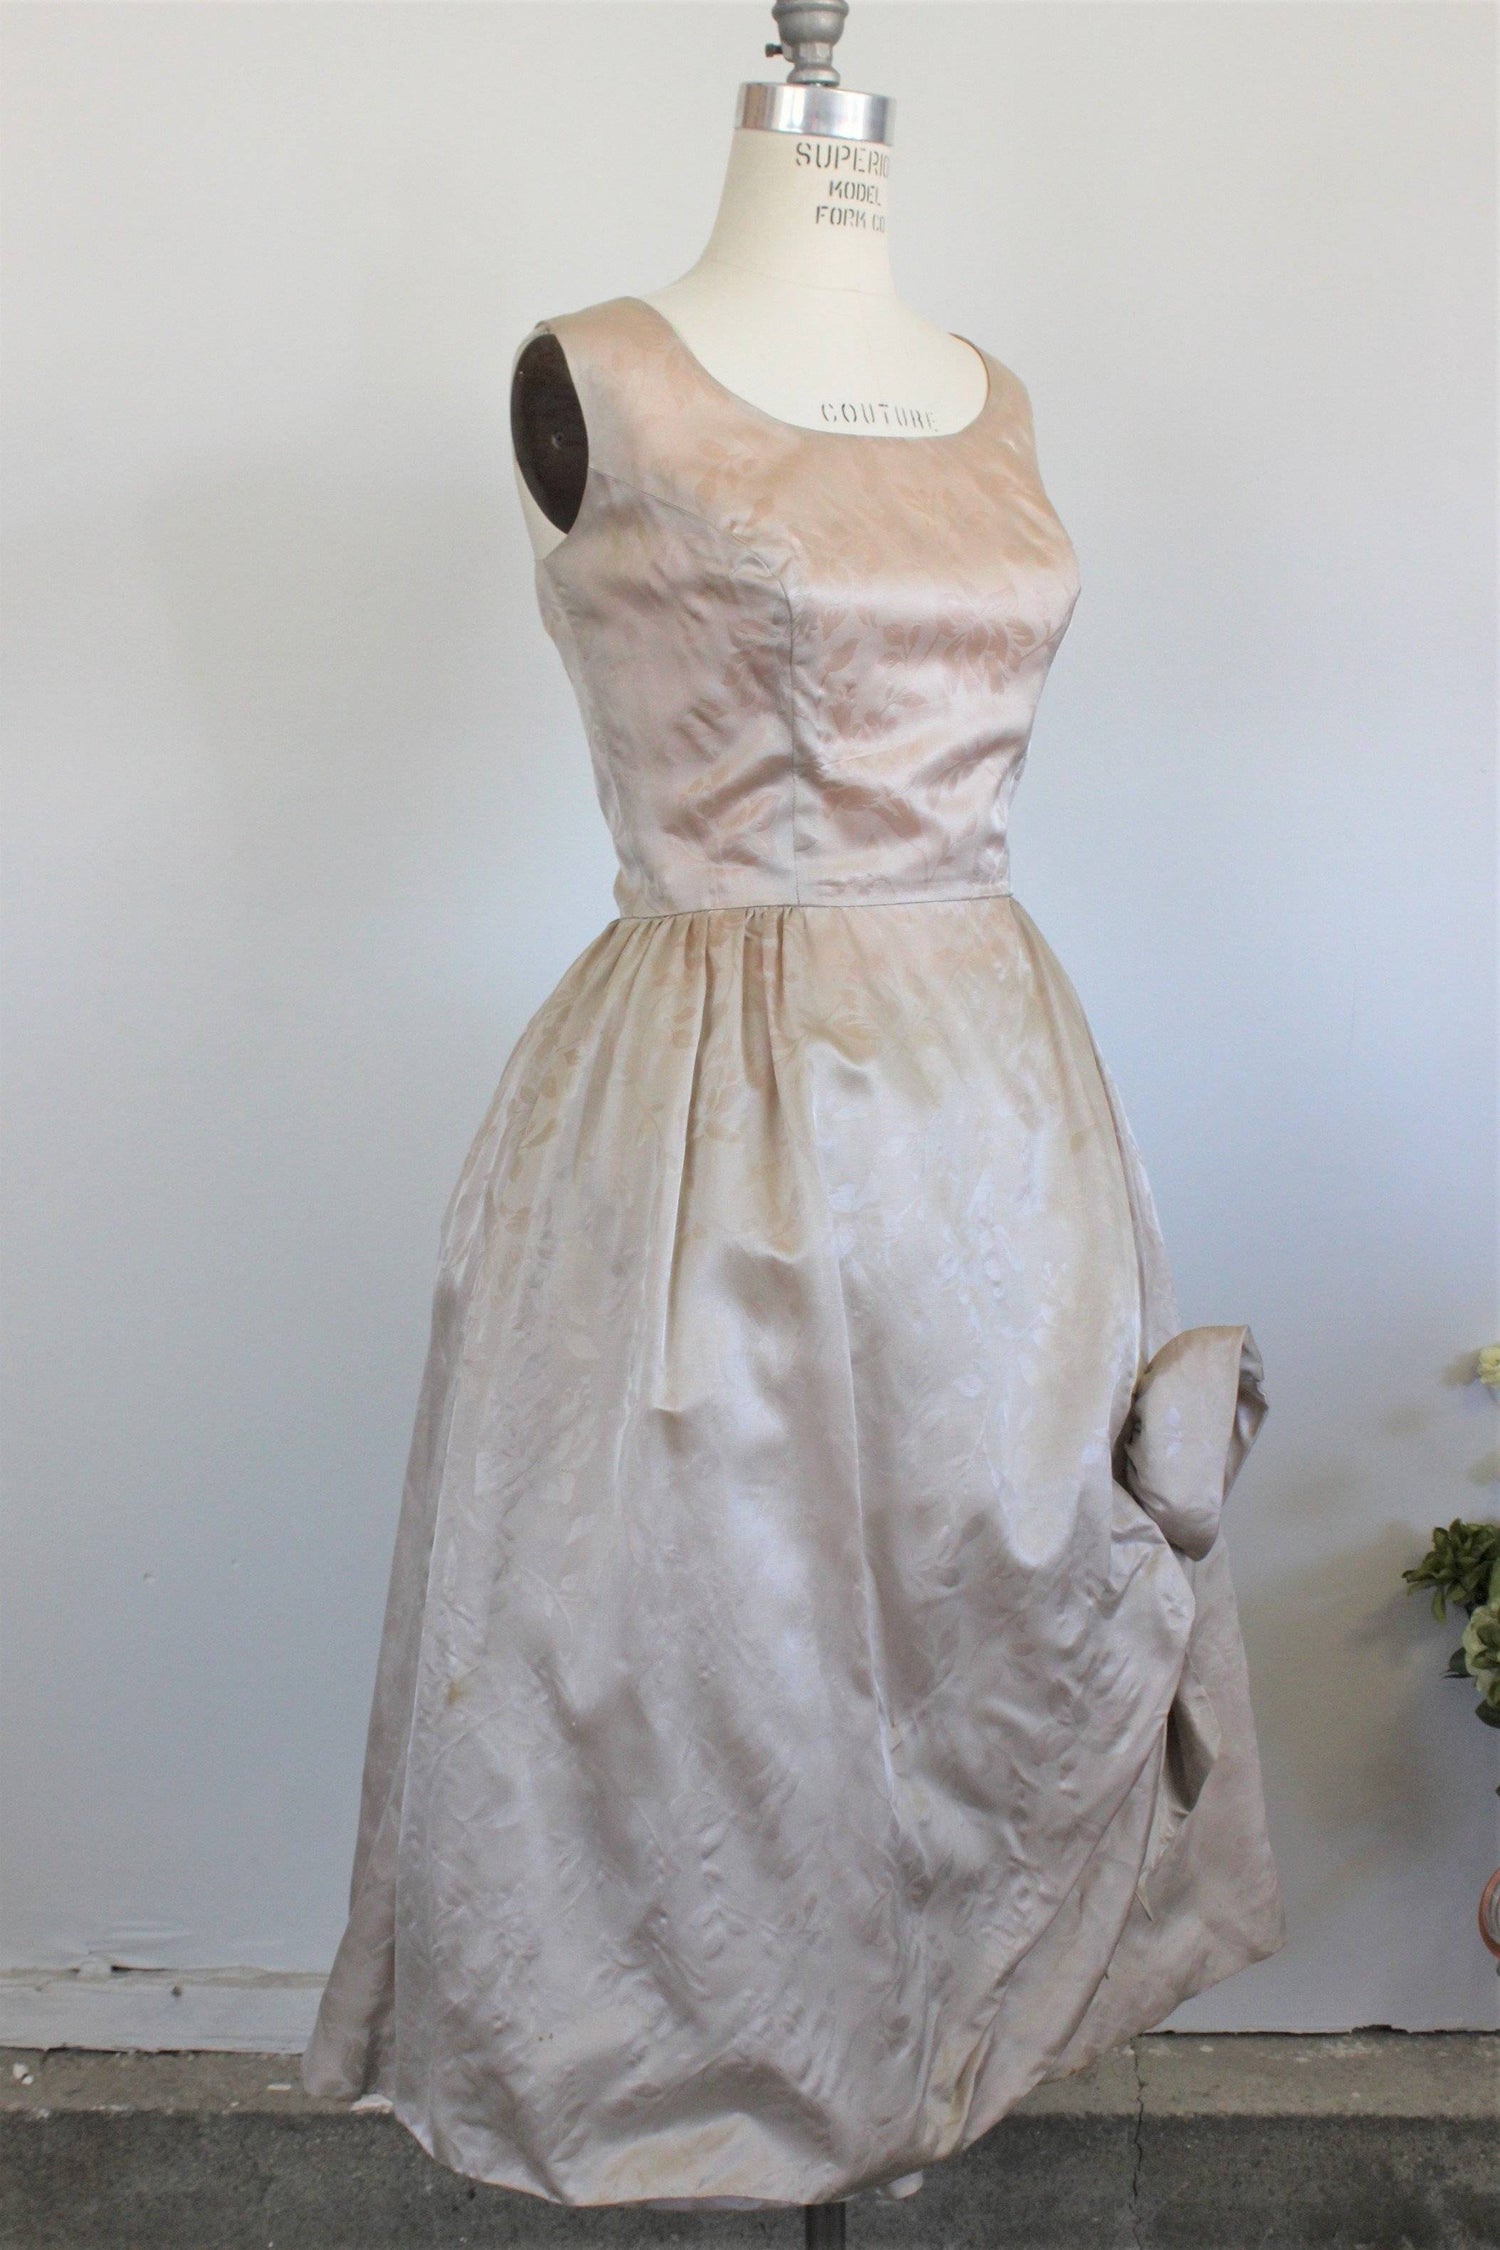 Vintage 1960s Jeannette Alexander Party Dress in Taupe-Toadstool Farm Vintage-1960s Dress,60s Bridesmaid Dress,Fit and Flare Dress,Jeannette Alexander,Metal Zipper,Vintage,Vintage Clothing,Vintage Dress,Vintage Dresses,VintageWedding